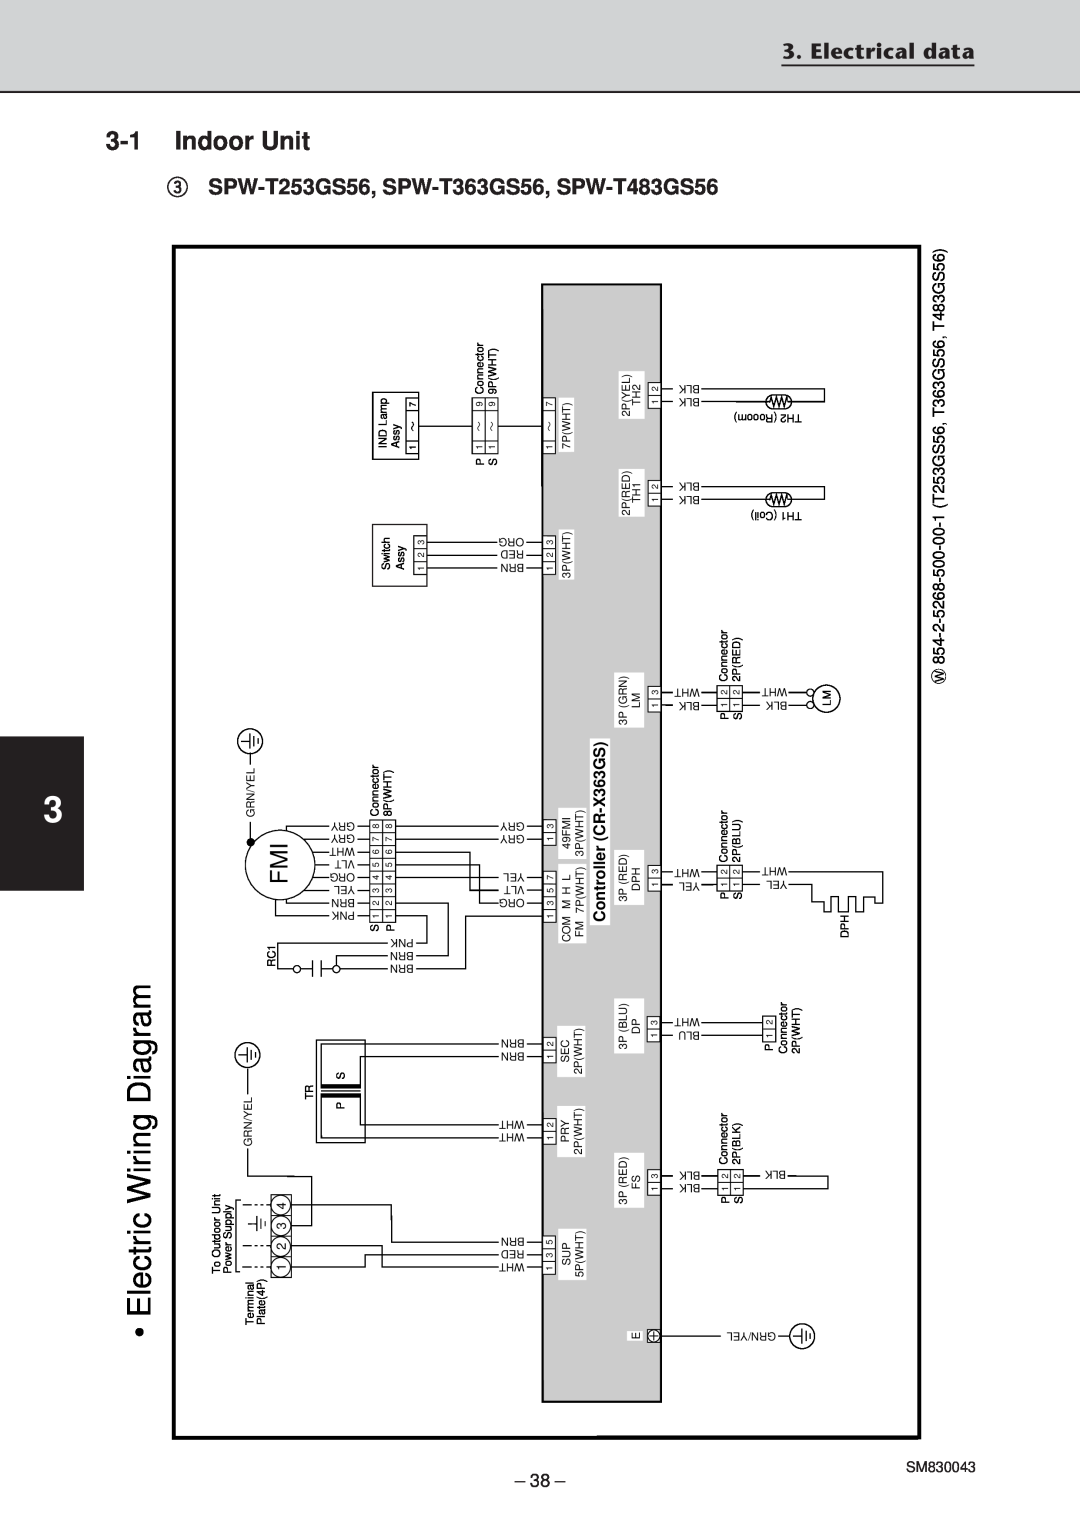 Sanyo SPW-T483GS56, SPW-T363GS56, SPW-T483G56, SPW-C363G8 Diagram, ElectricWiring, 3-1Indoor Unit, Electrical data 